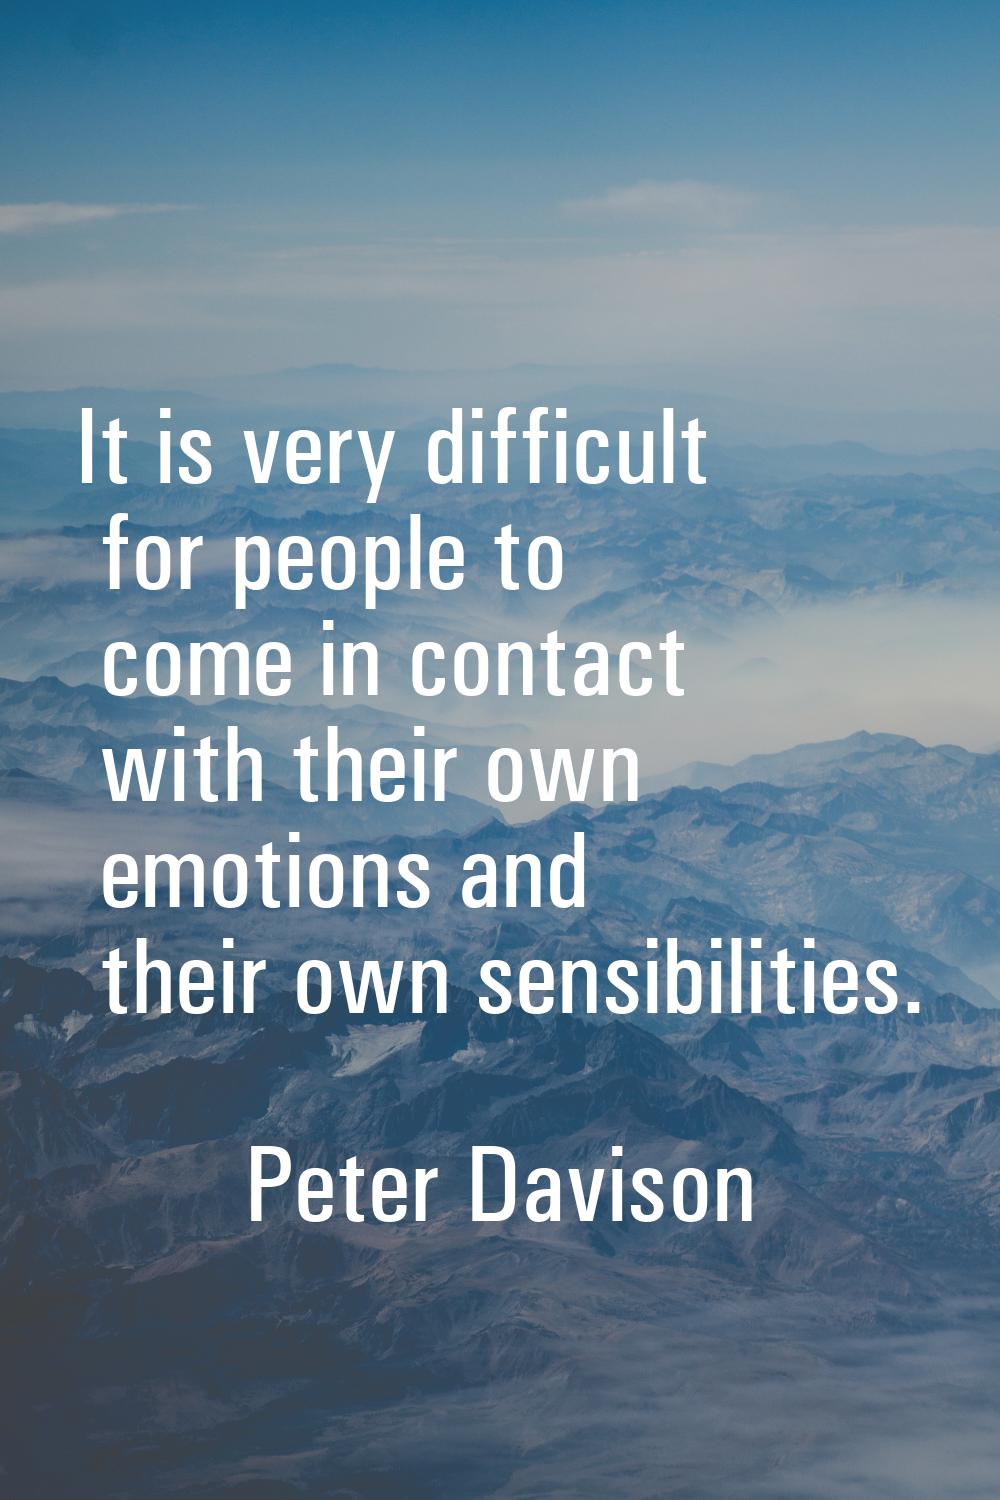 It is very difficult for people to come in contact with their own emotions and their own sensibilit